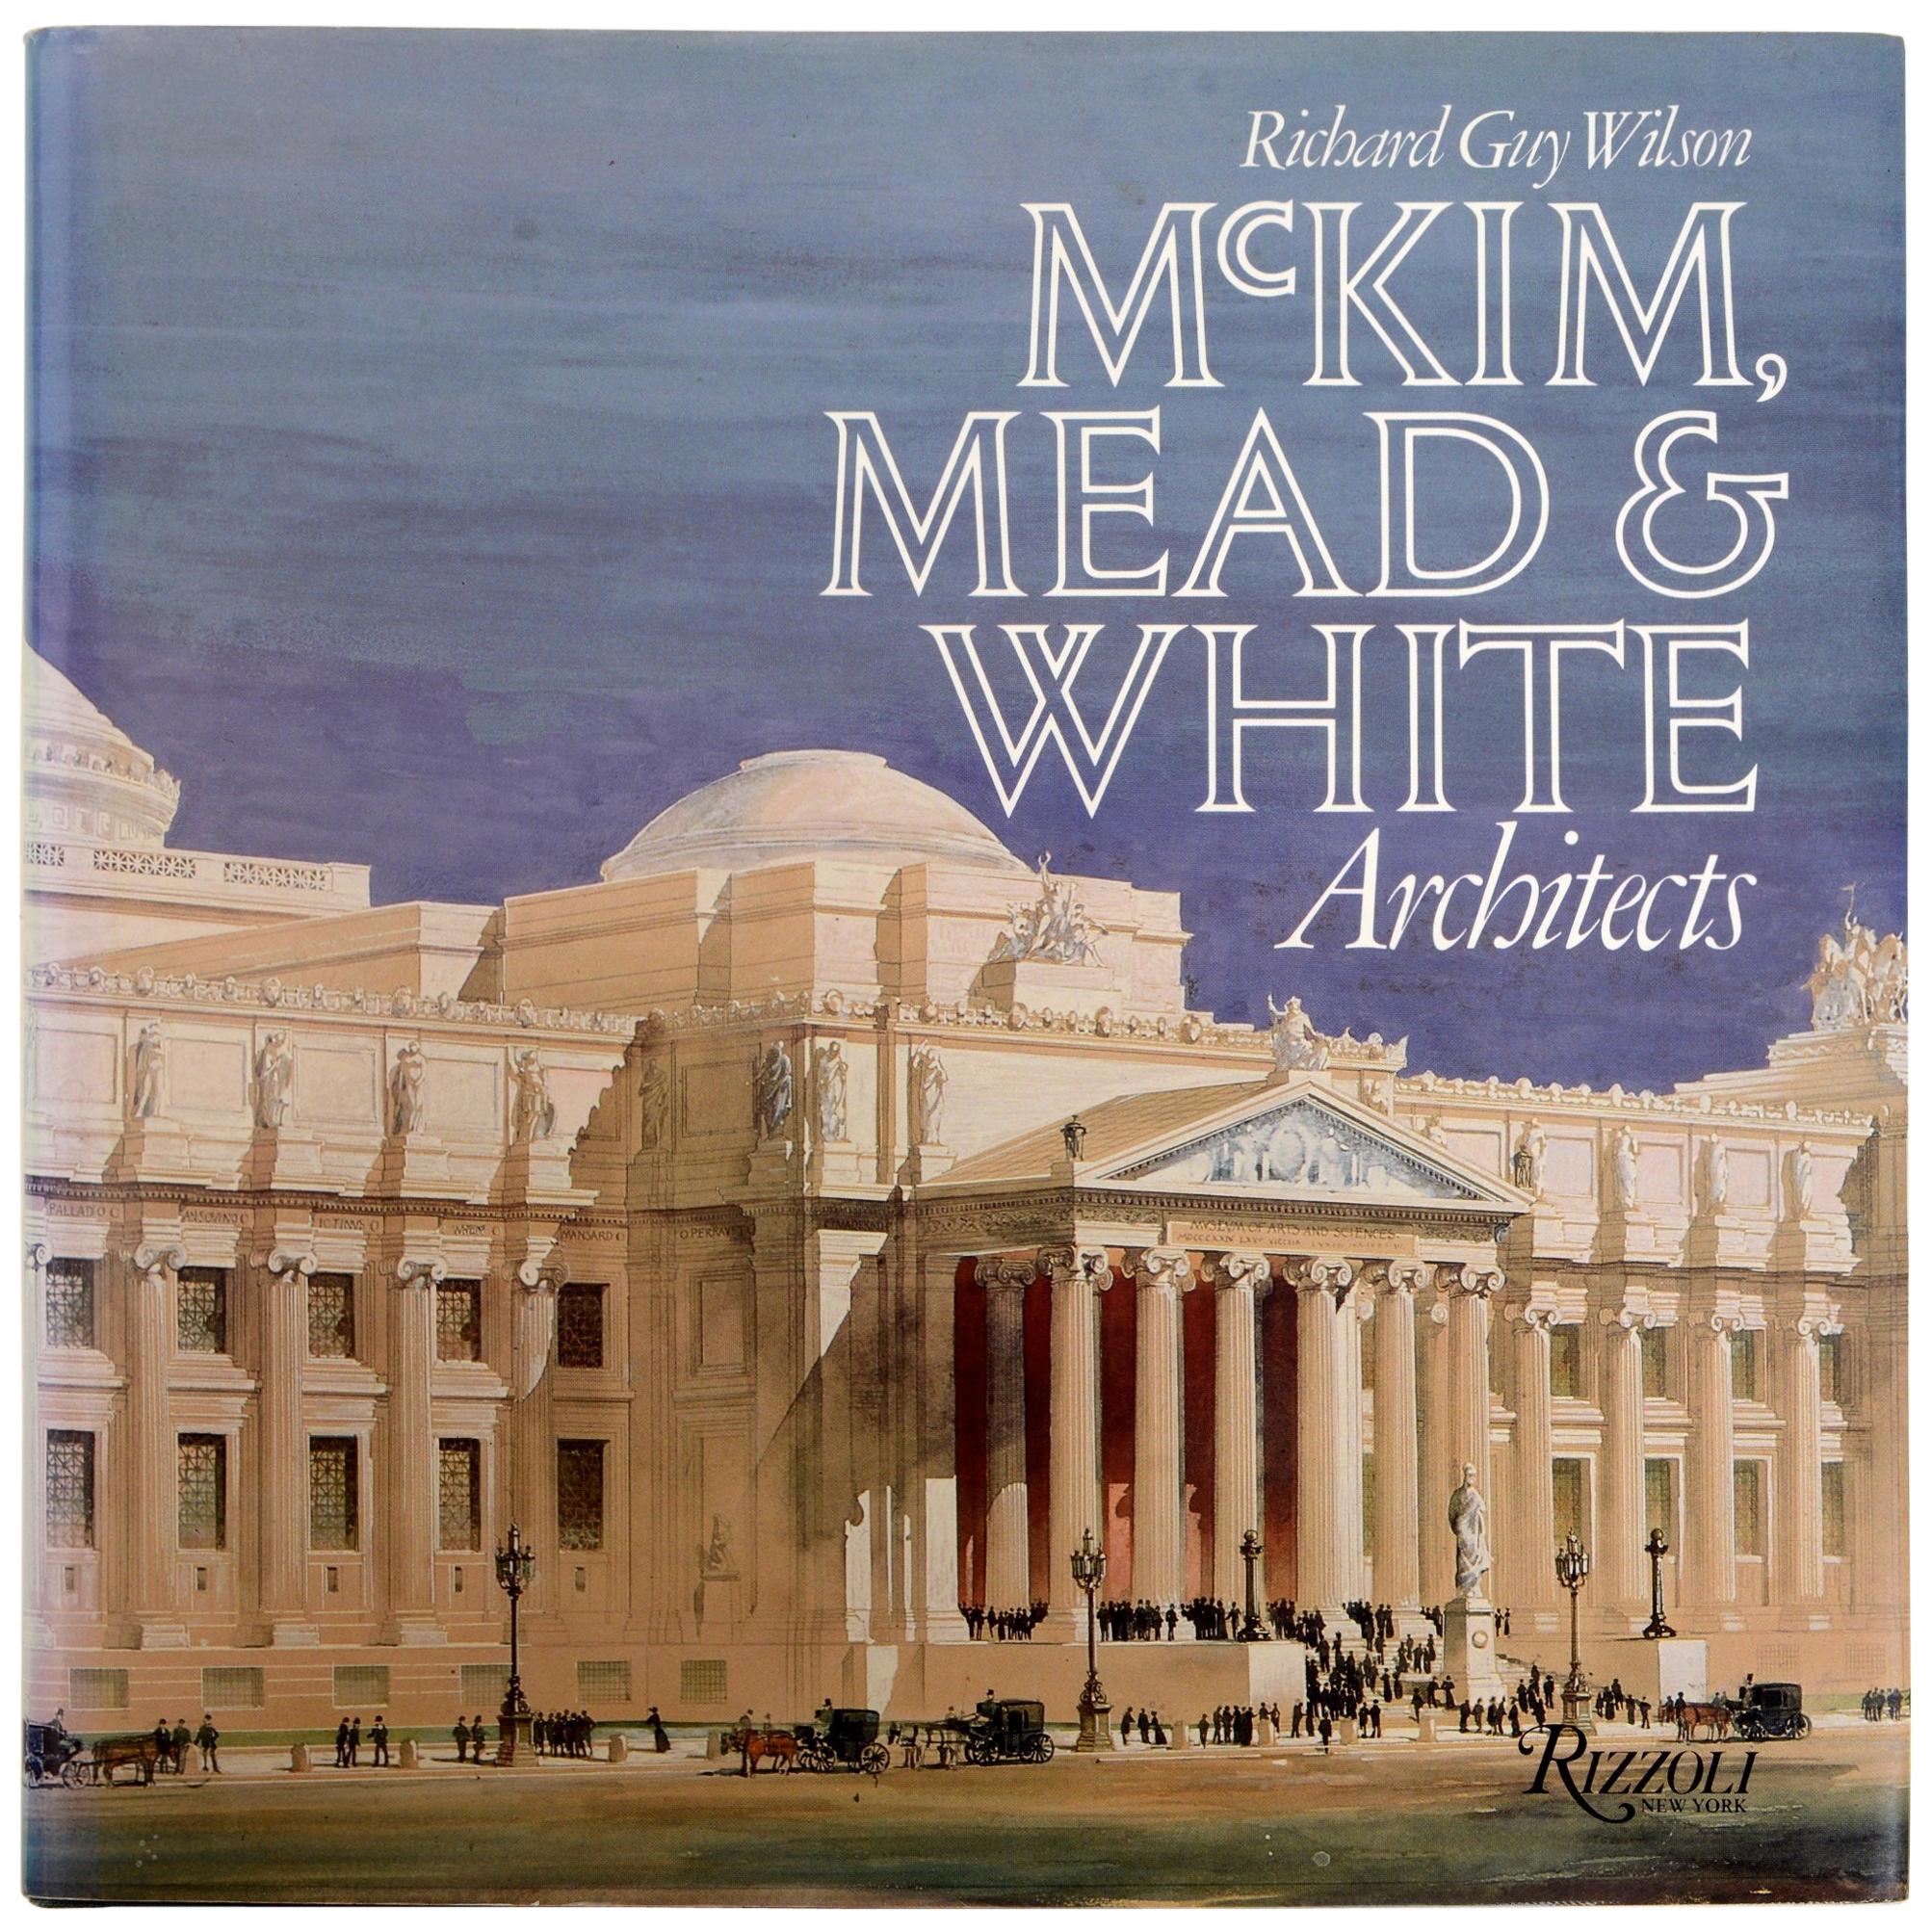 McKim, Mead and White, Architects by Richard G. Wilson, First Edition